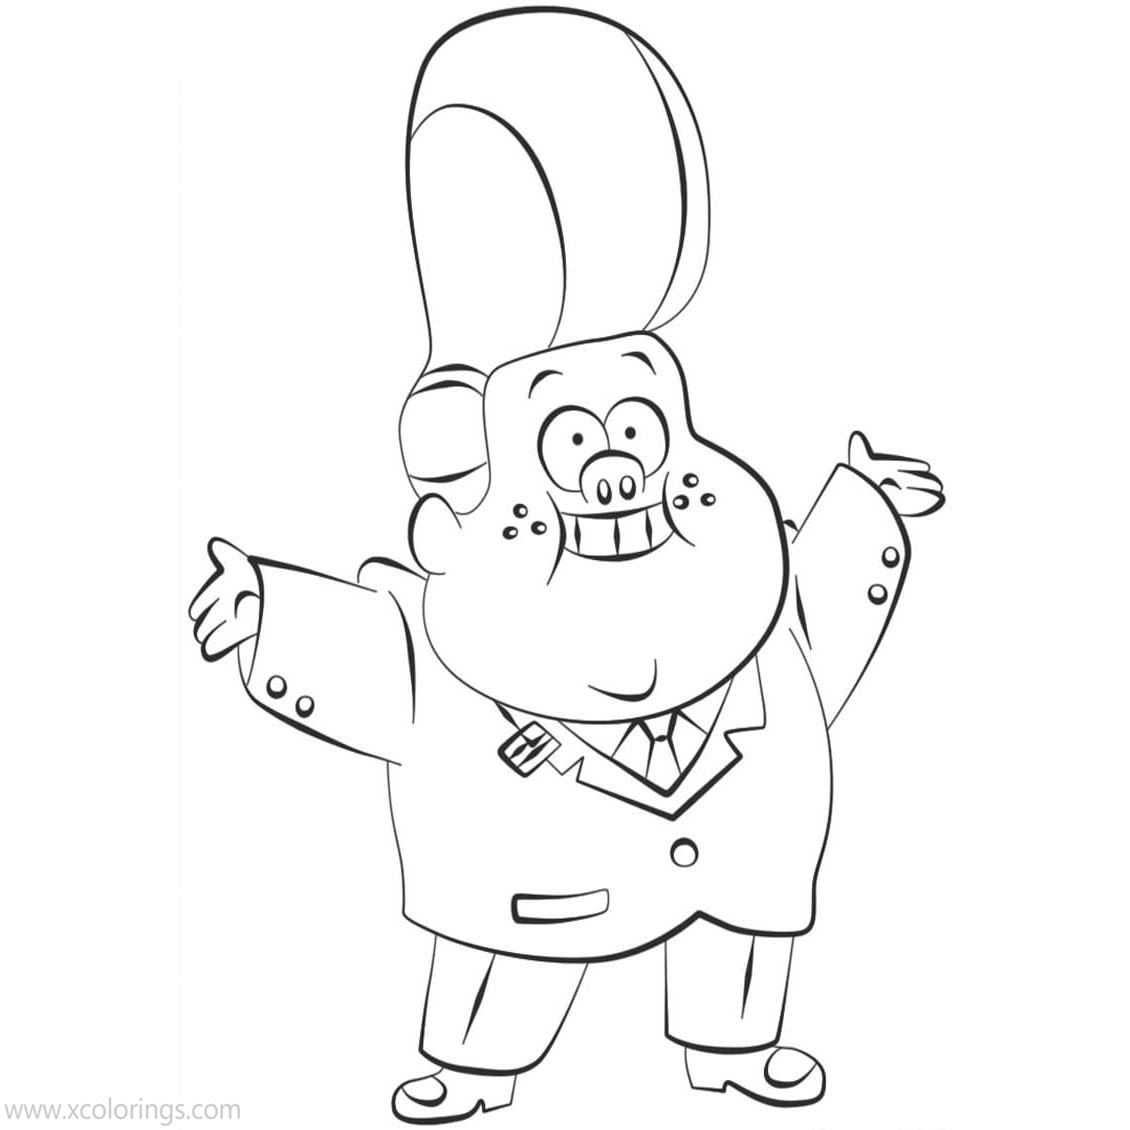 Free Gravity Falls Coloring Pages Gideon Glyful printable